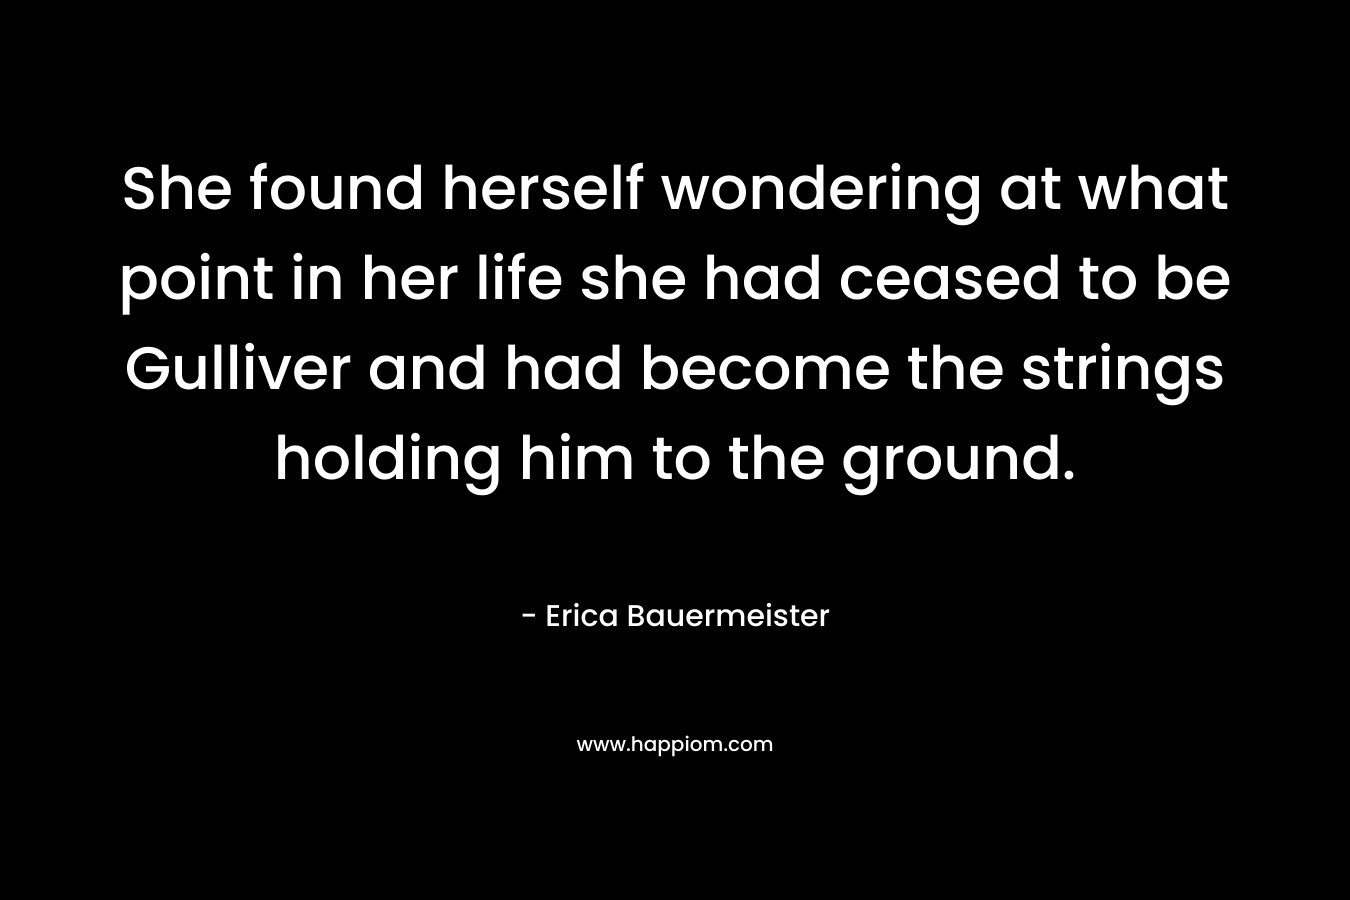 She found herself wondering at what point in her life she had ceased to be Gulliver and had become the strings holding him to the ground. – Erica Bauermeister